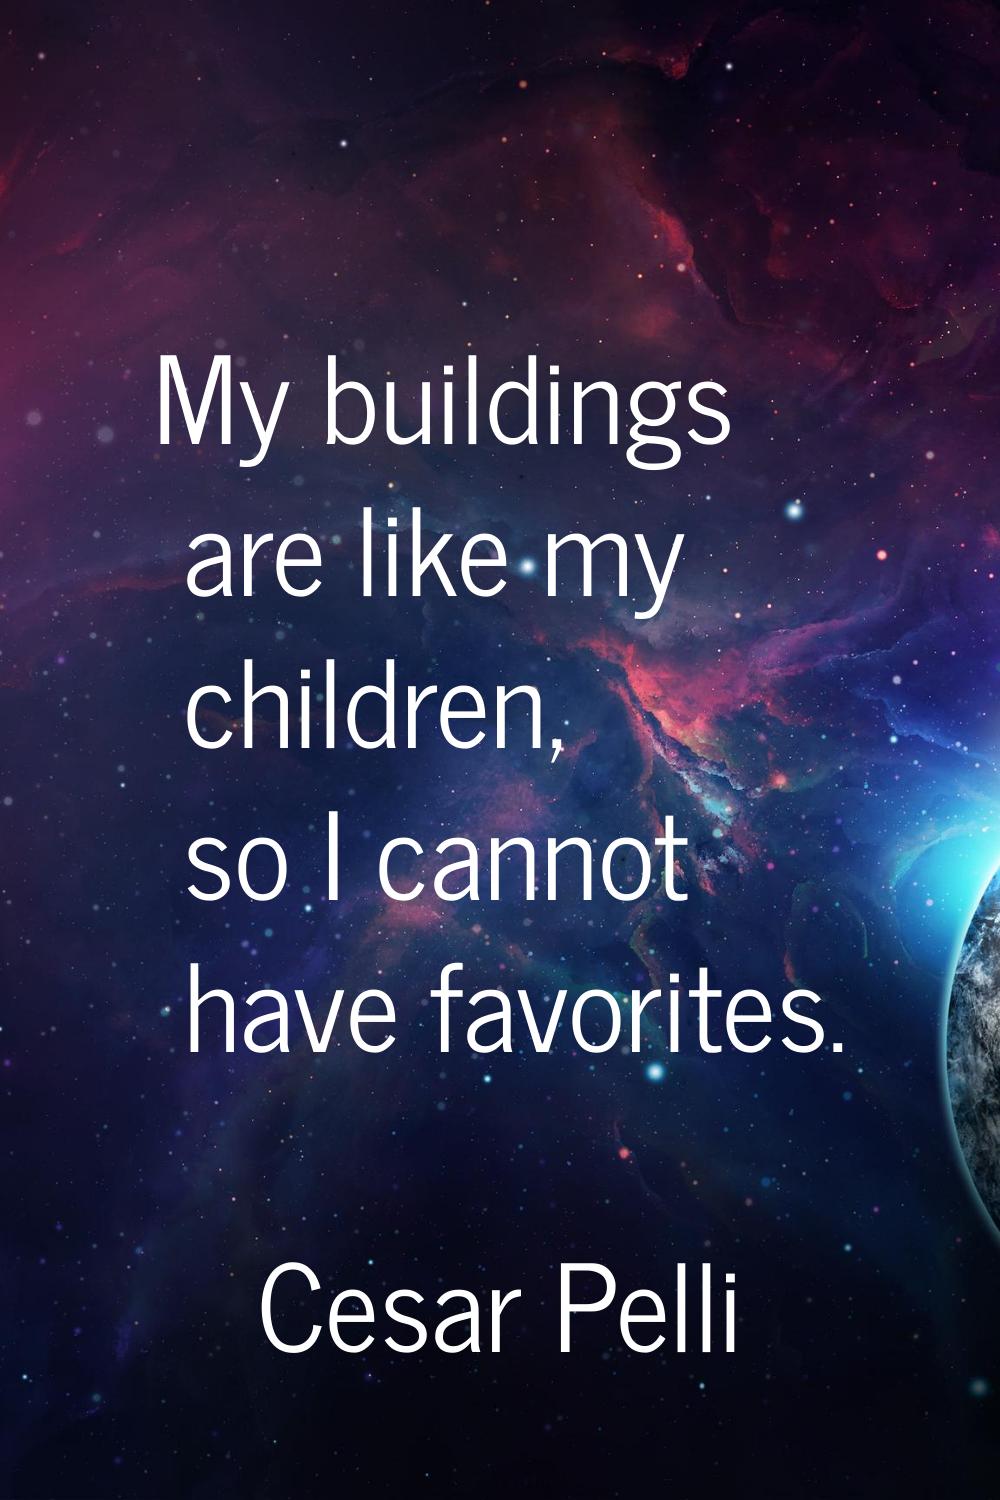 My buildings are like my children, so I cannot have favorites.